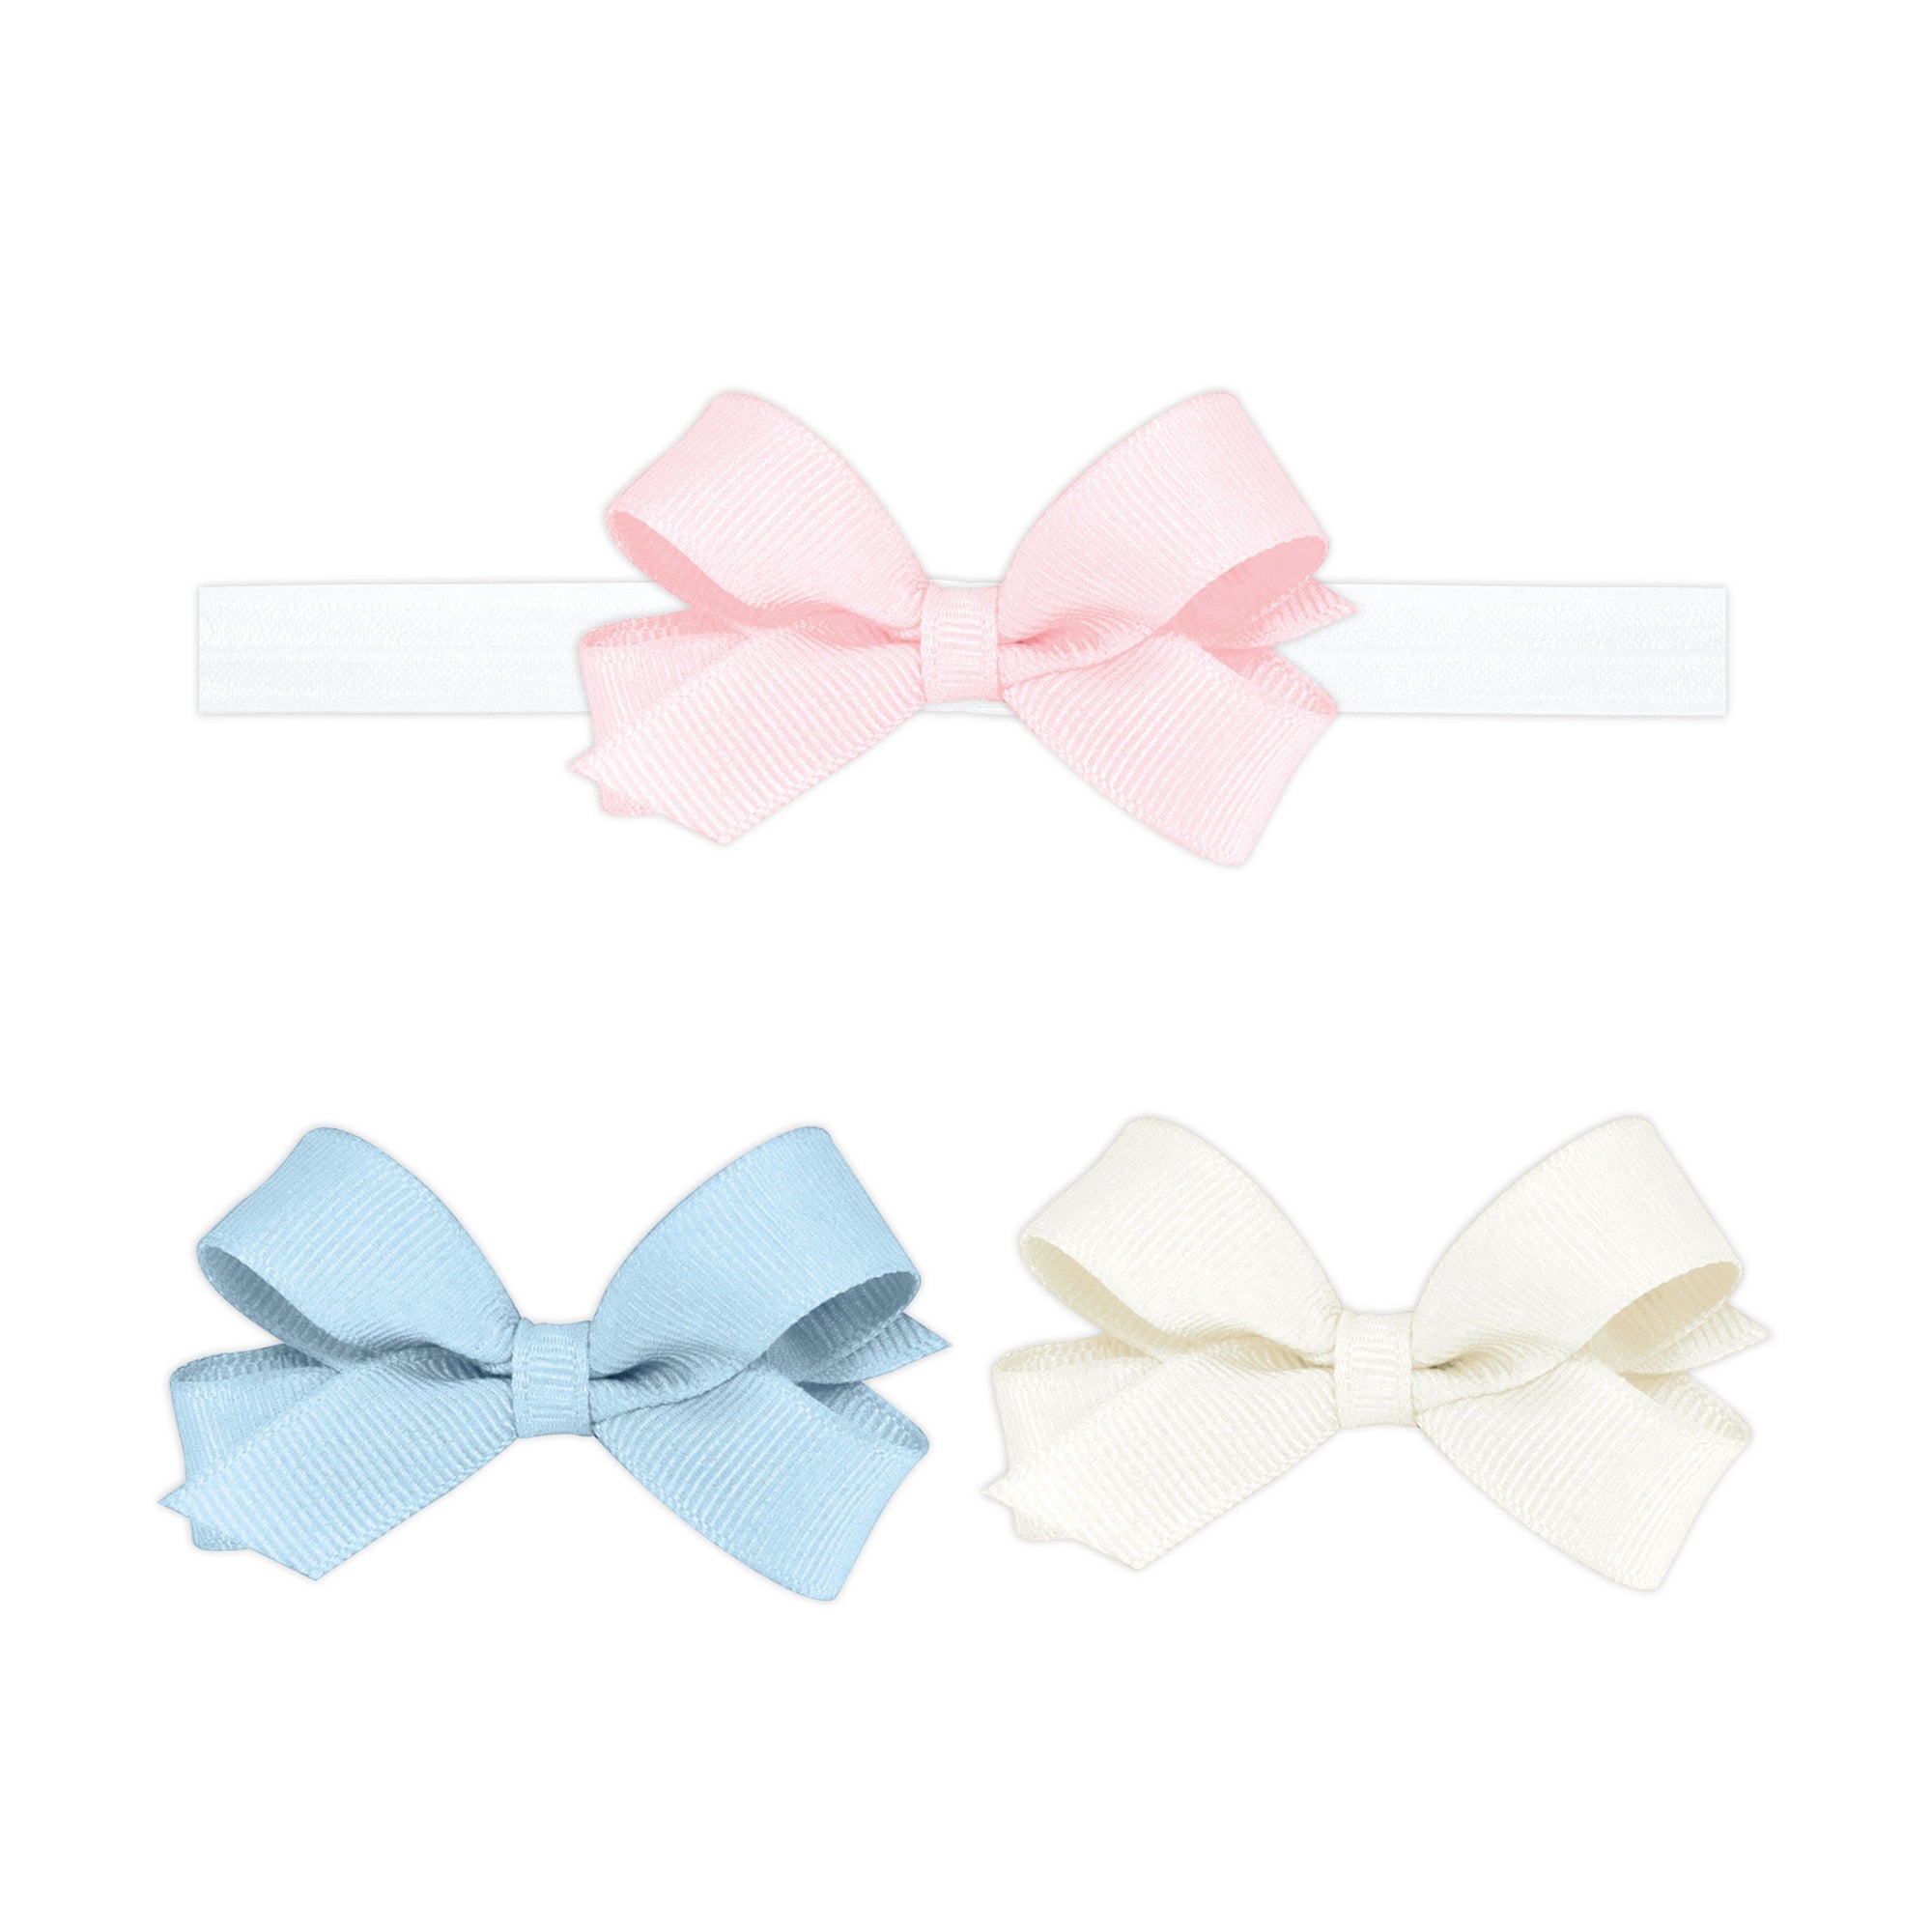 wee ones: Three Tiny Grosgrain Hair Bows and One Add-A-Bow Band